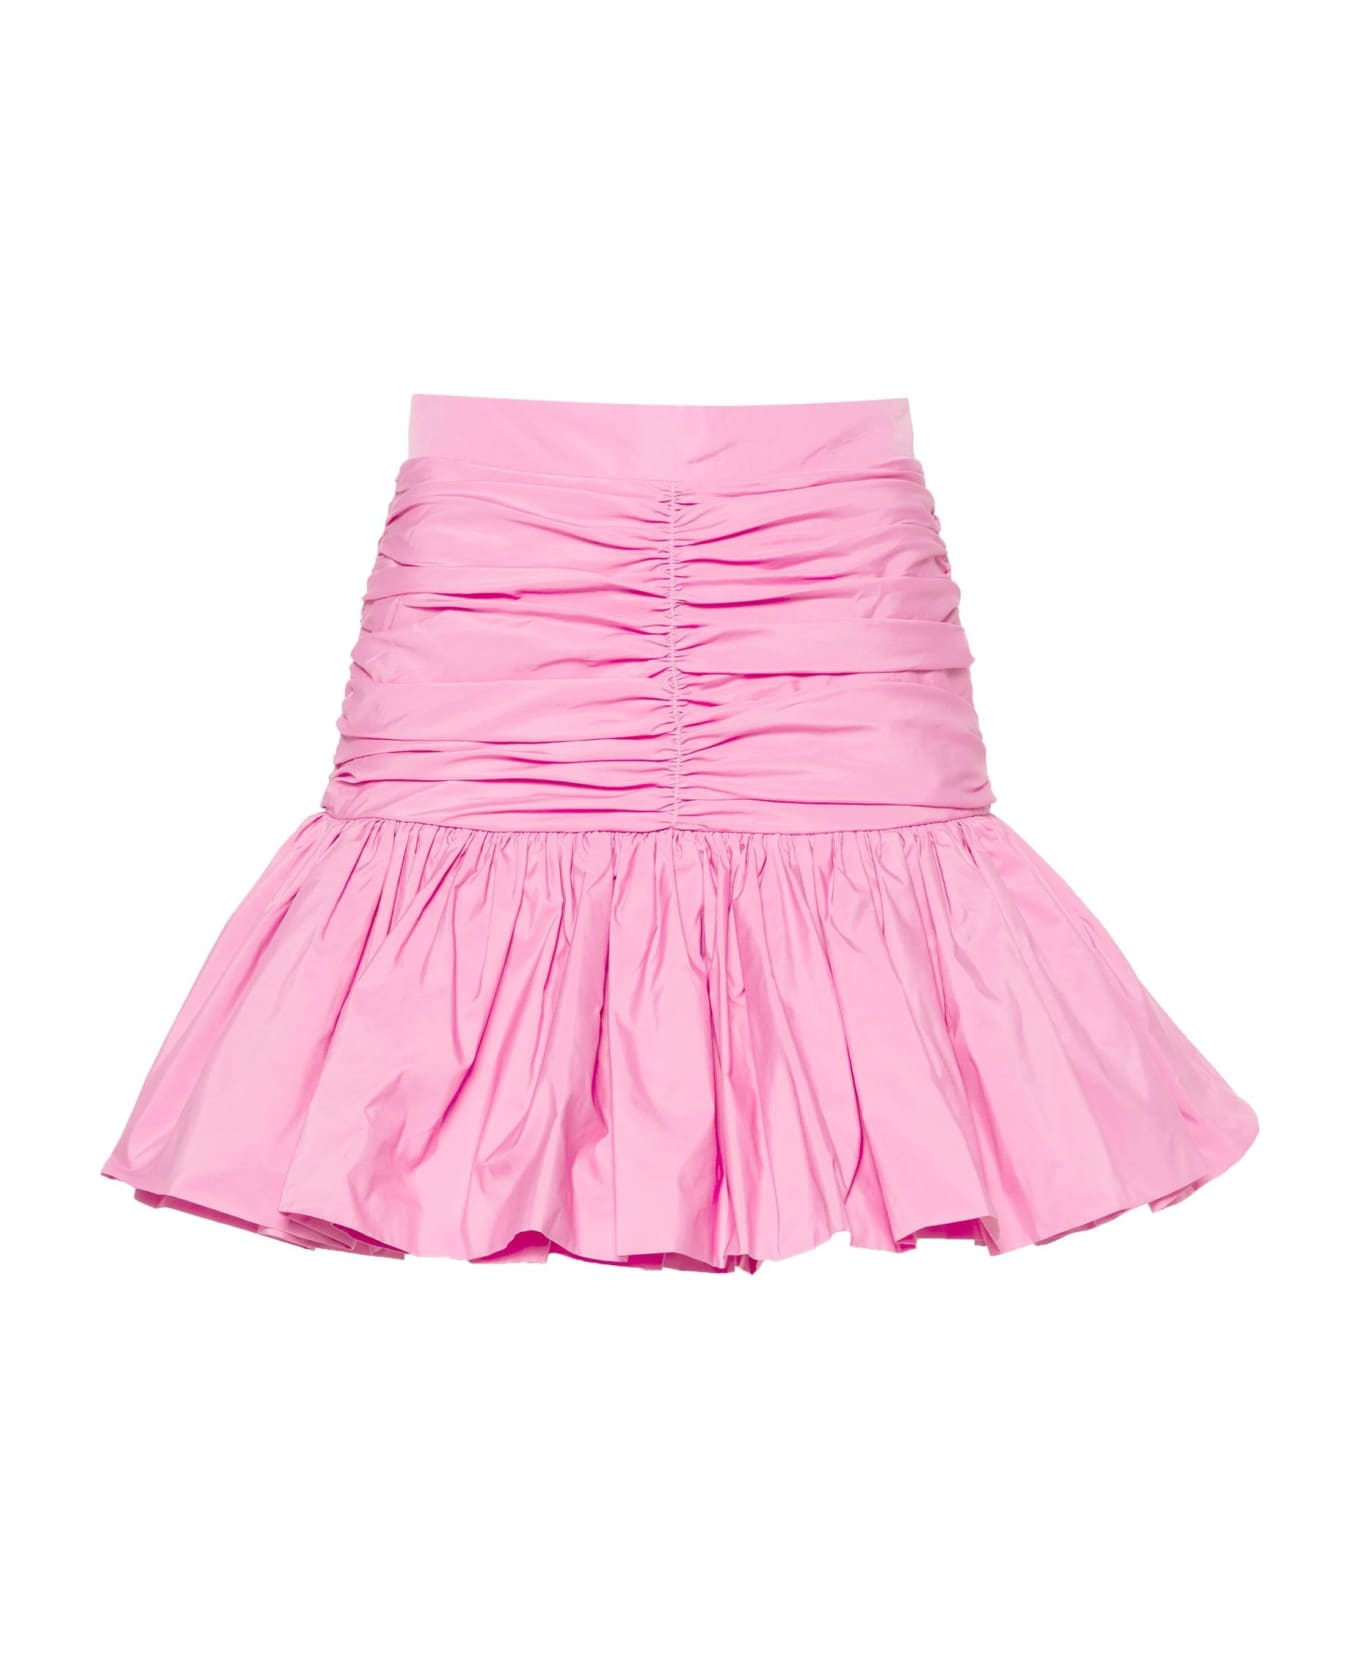 Patou Pink Recycled Polyester Faille Skirt - Pink